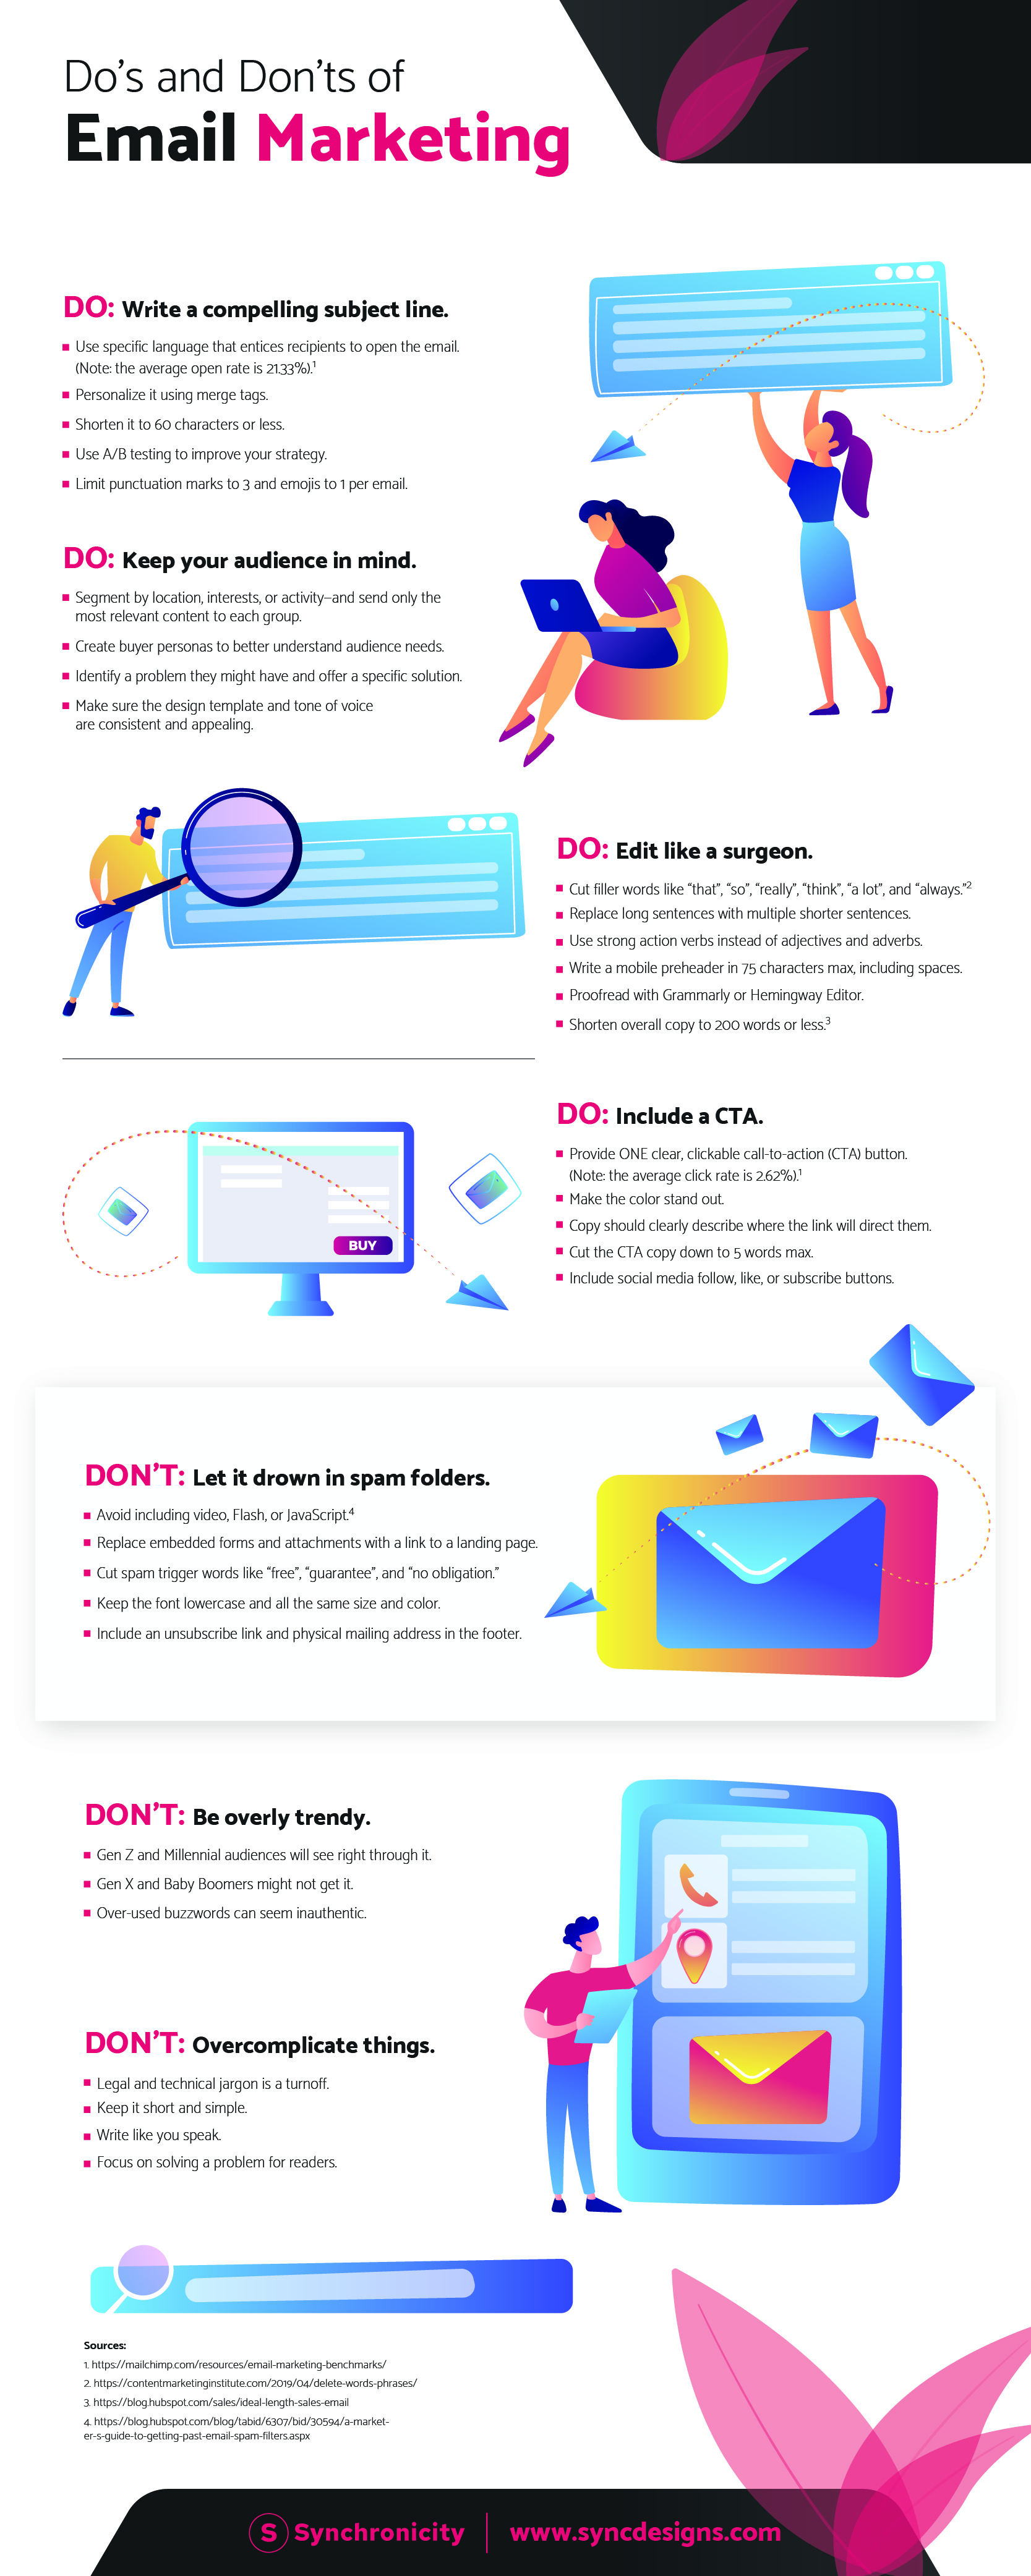 SYNC_Do's and Don'ts of Creating an Email-01.jpg